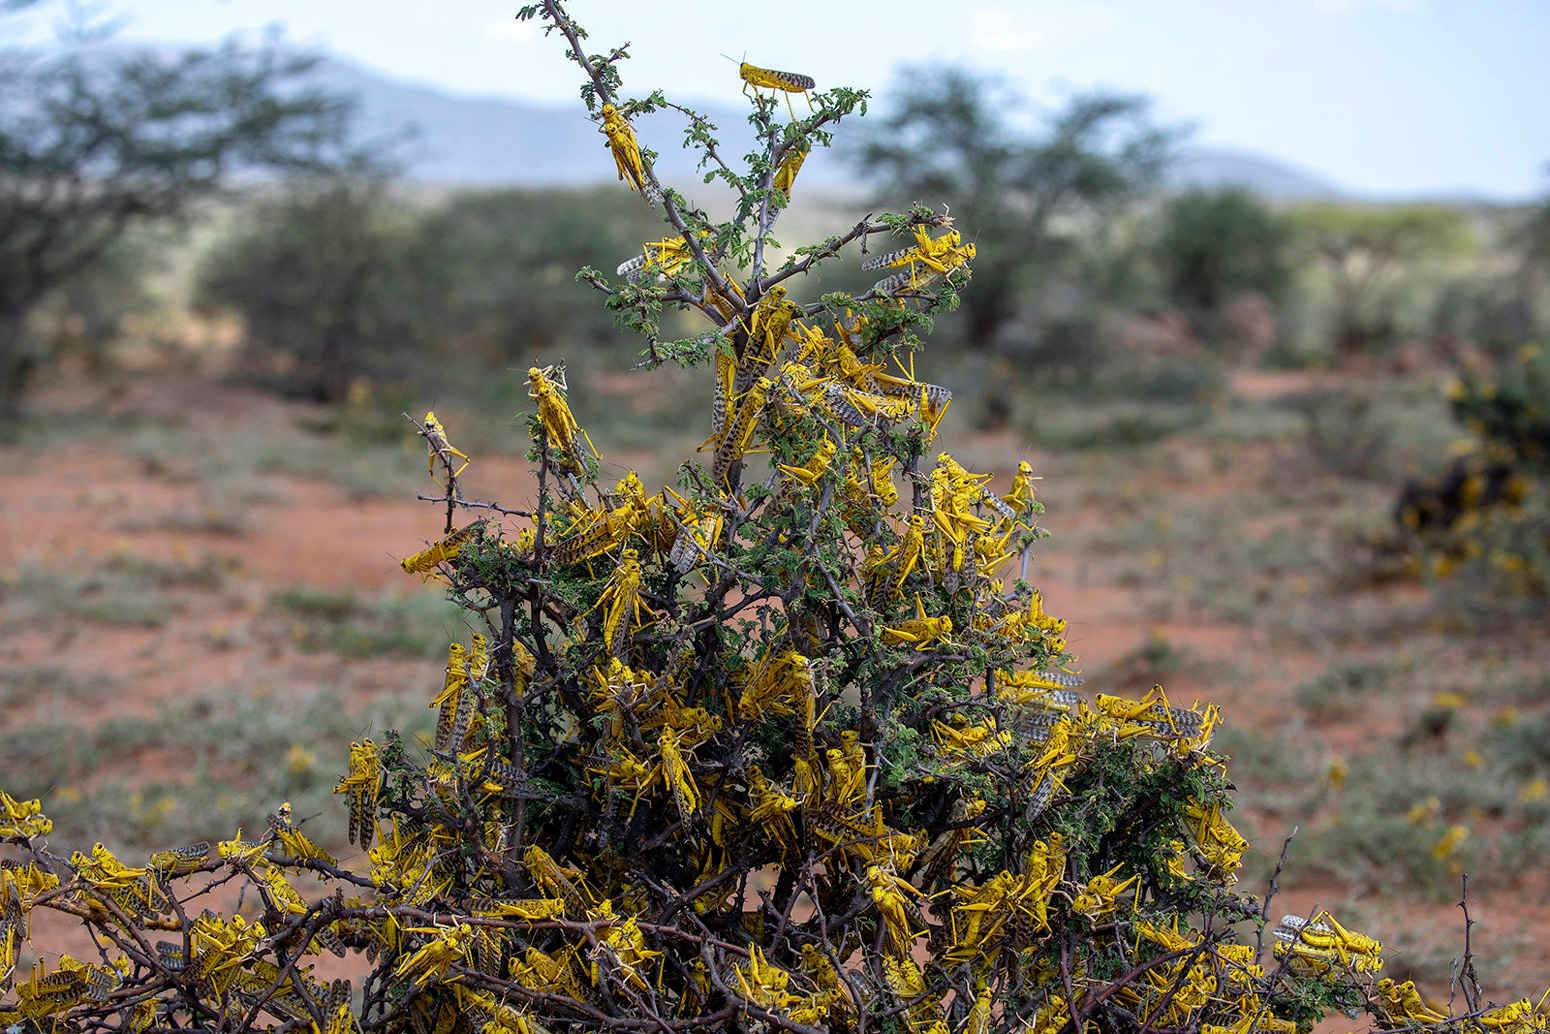 21 January 2020, Lekiji, Samburu County, near Wamba - A desert locust in northeastern Kenya. A locust swarm takes to the sky in a recent upsurge in northeastern Kenya. The United Nations Food and Agriculture Organization (FAO) warned that the desert locust swarms that have already reached Somalia, Kenya and Ethiopia could spill over into more countries in East Africa destroying hundreds of thousands of acres of crops.